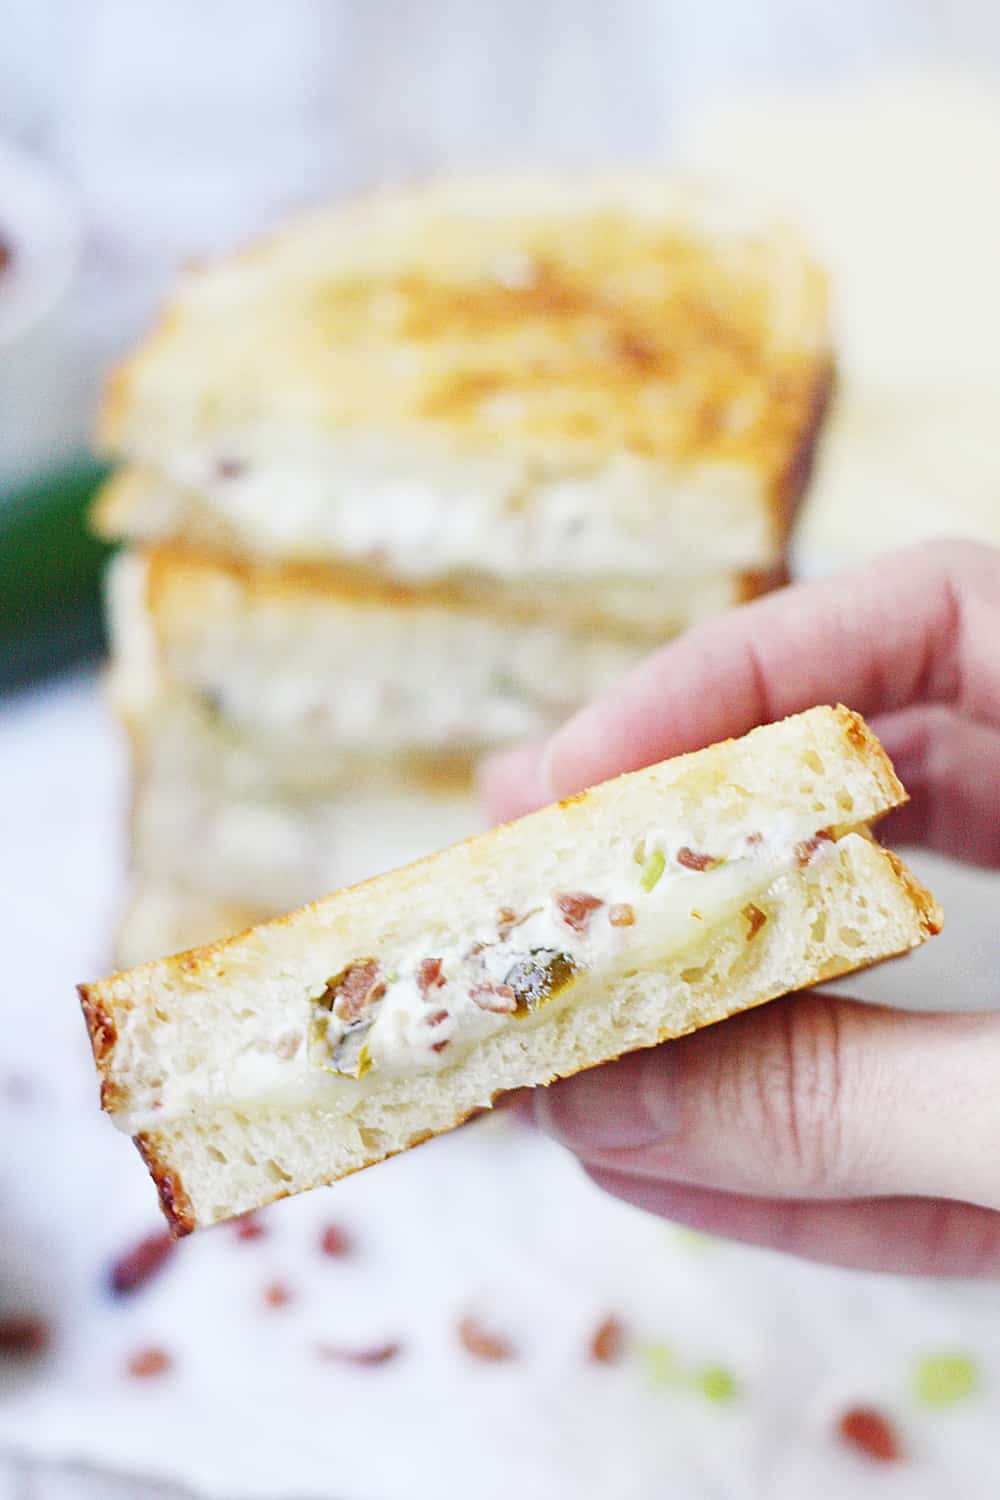 EASY Jalapeno Popper Grilled Cheese Sandwich - This easy jalapeno popper grilled cheese sandwich combines that amazing jalapeno popper flavor with bacon and sharp white cheddar for one irresistible gourmet grilled cheese! #grilledcheese #jalapeno #jalapenopopper #sandwich #grilledcheesesandwich #cheese #easyrecipe #recipe #halfscratched #maindish #savory